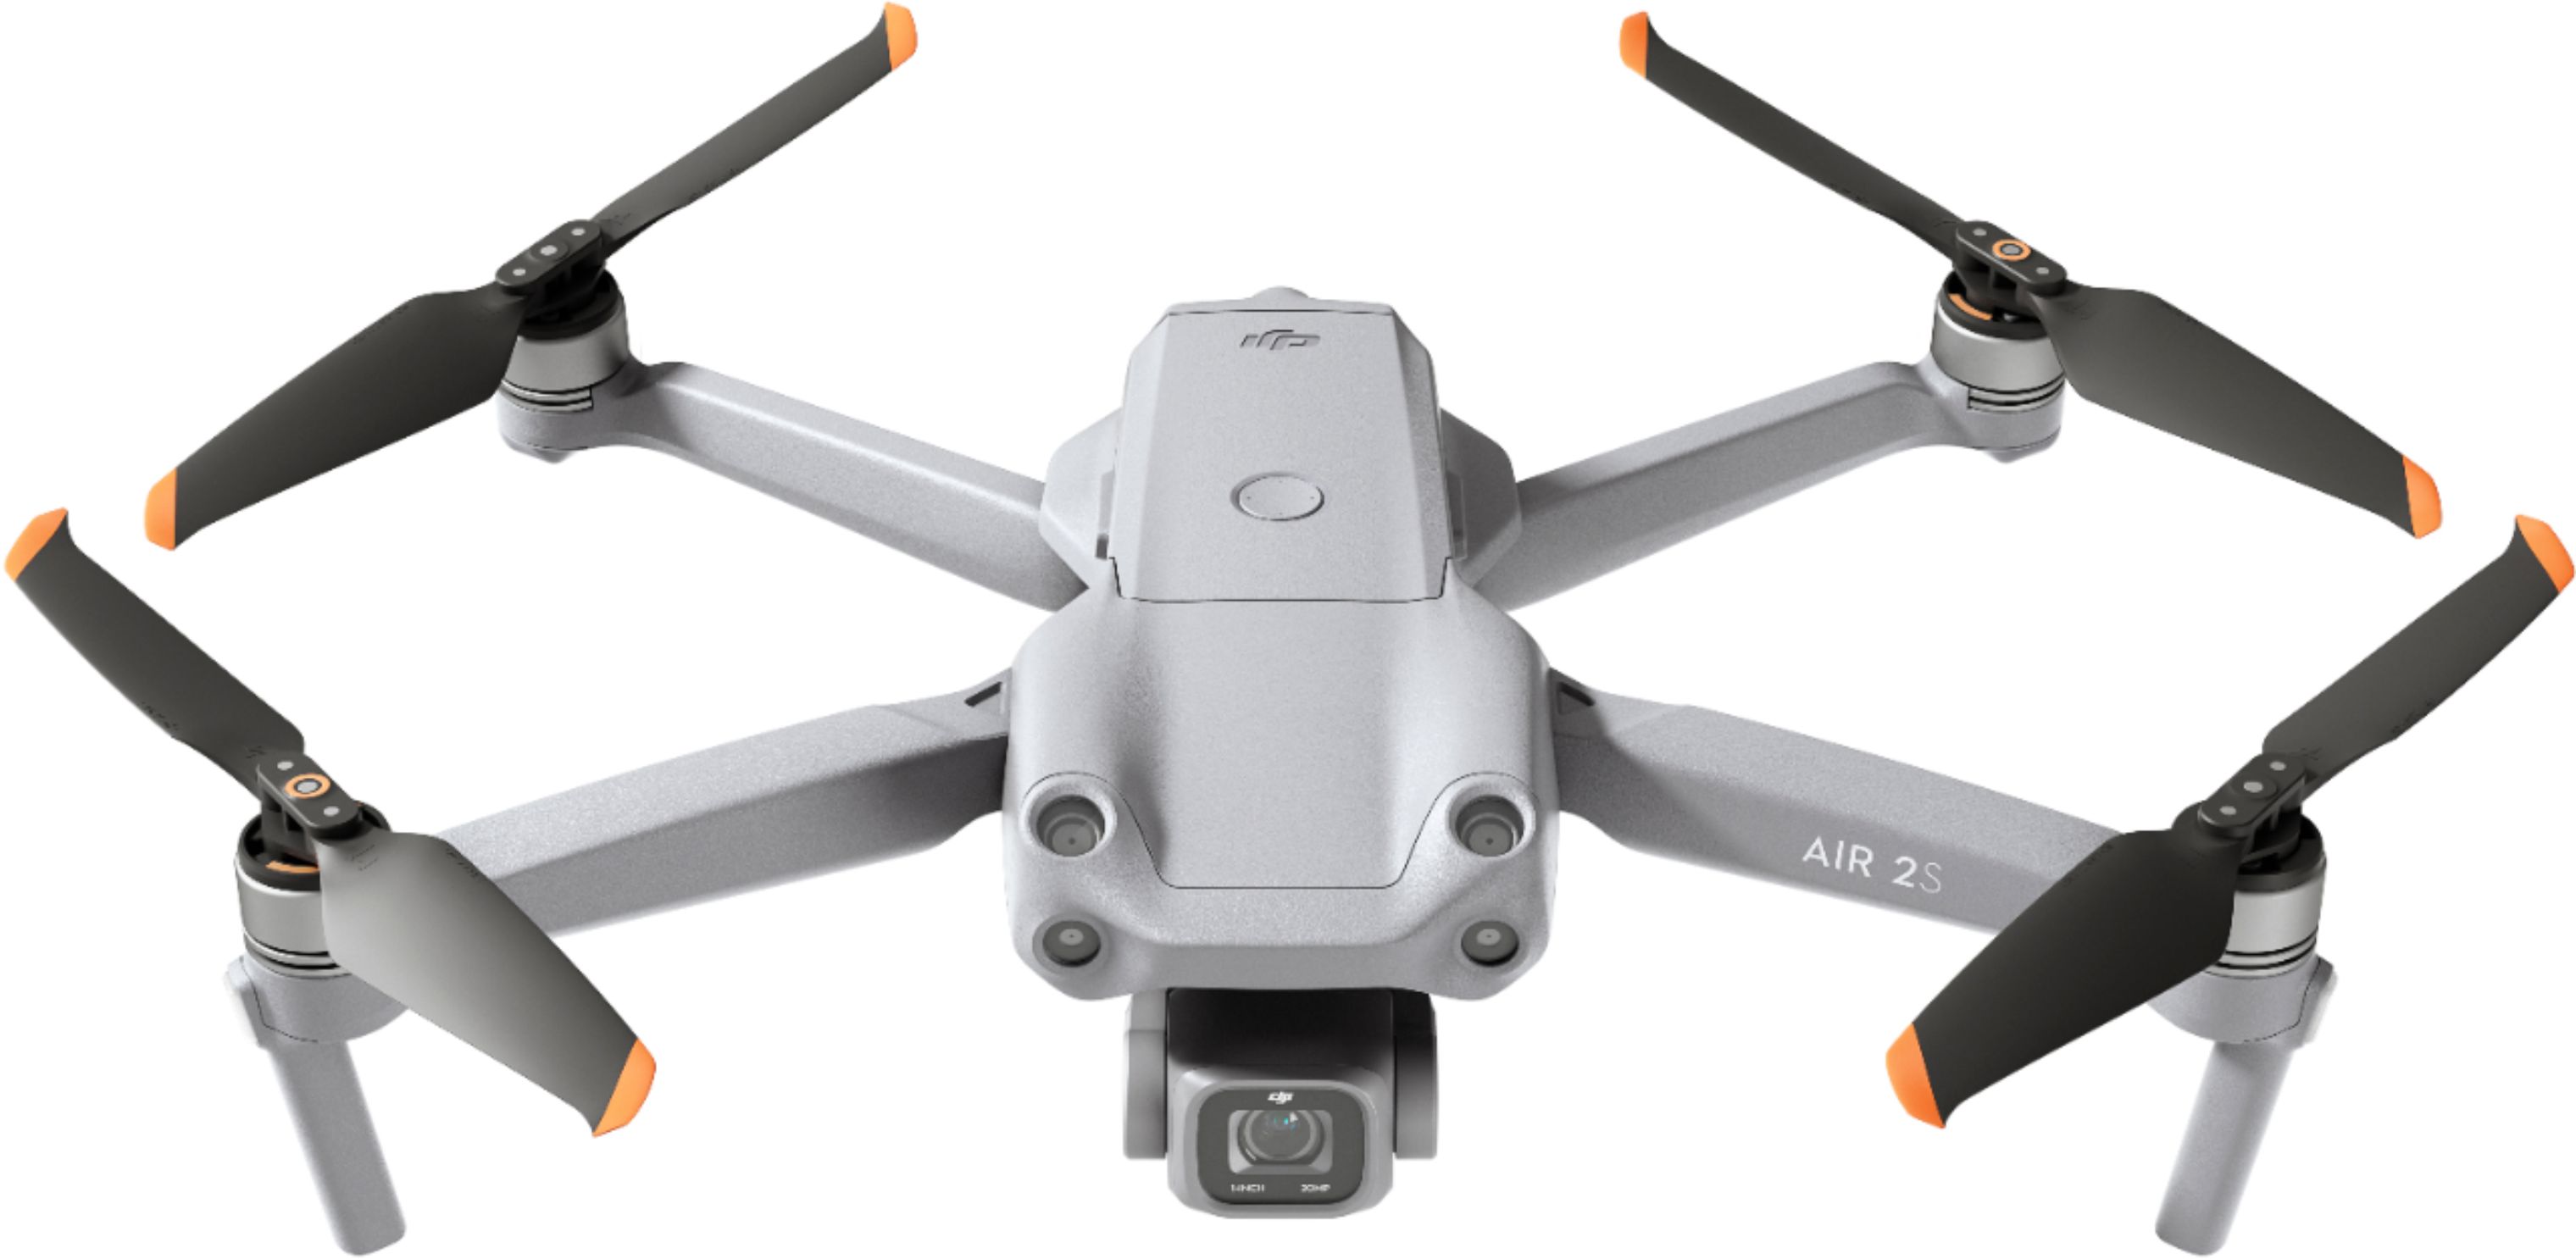 0190021036574 - DJI AIR 2S - DRONE QUADCOPTER UAV WITH 3-AXIS GIMBAL CAMERA, 5.4K VIDEO, 1-INCH CMOS SENSOR, 4 DIRECTIONS OF OBSTACLE SENSING, 31-MIN FLIGHT TIME, MAX 7.5-MILE VIDEO TRANSMISSION, MASTERSHOTS, GRAY